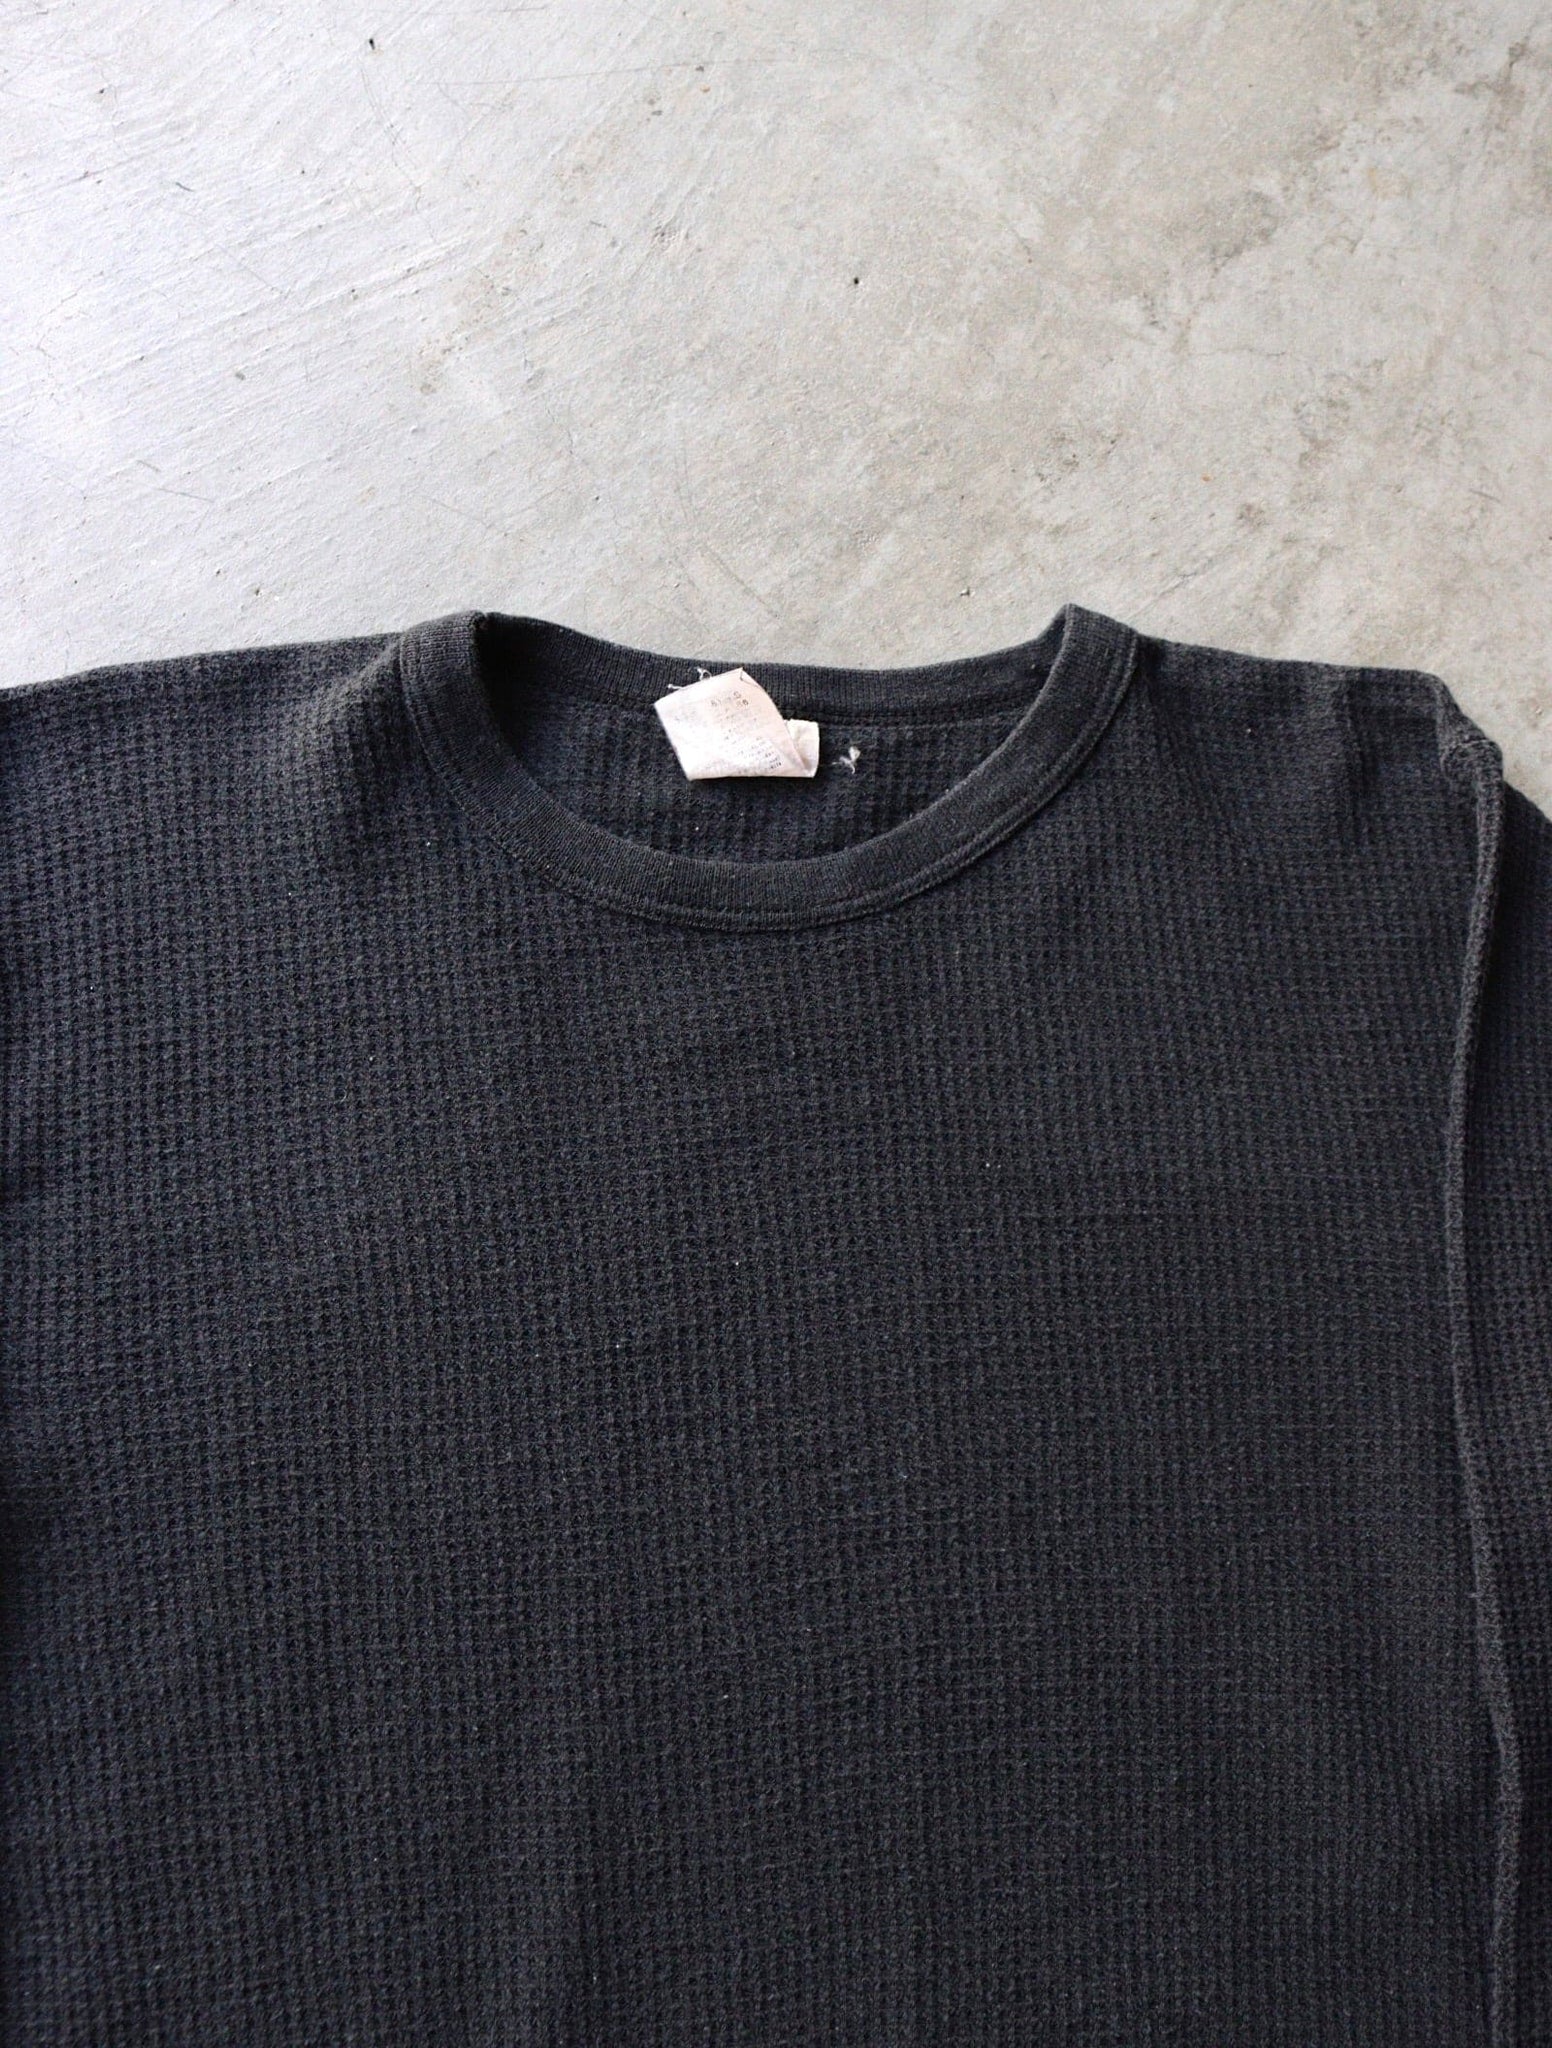 1990S FADED THERMAL L/S SHIRT